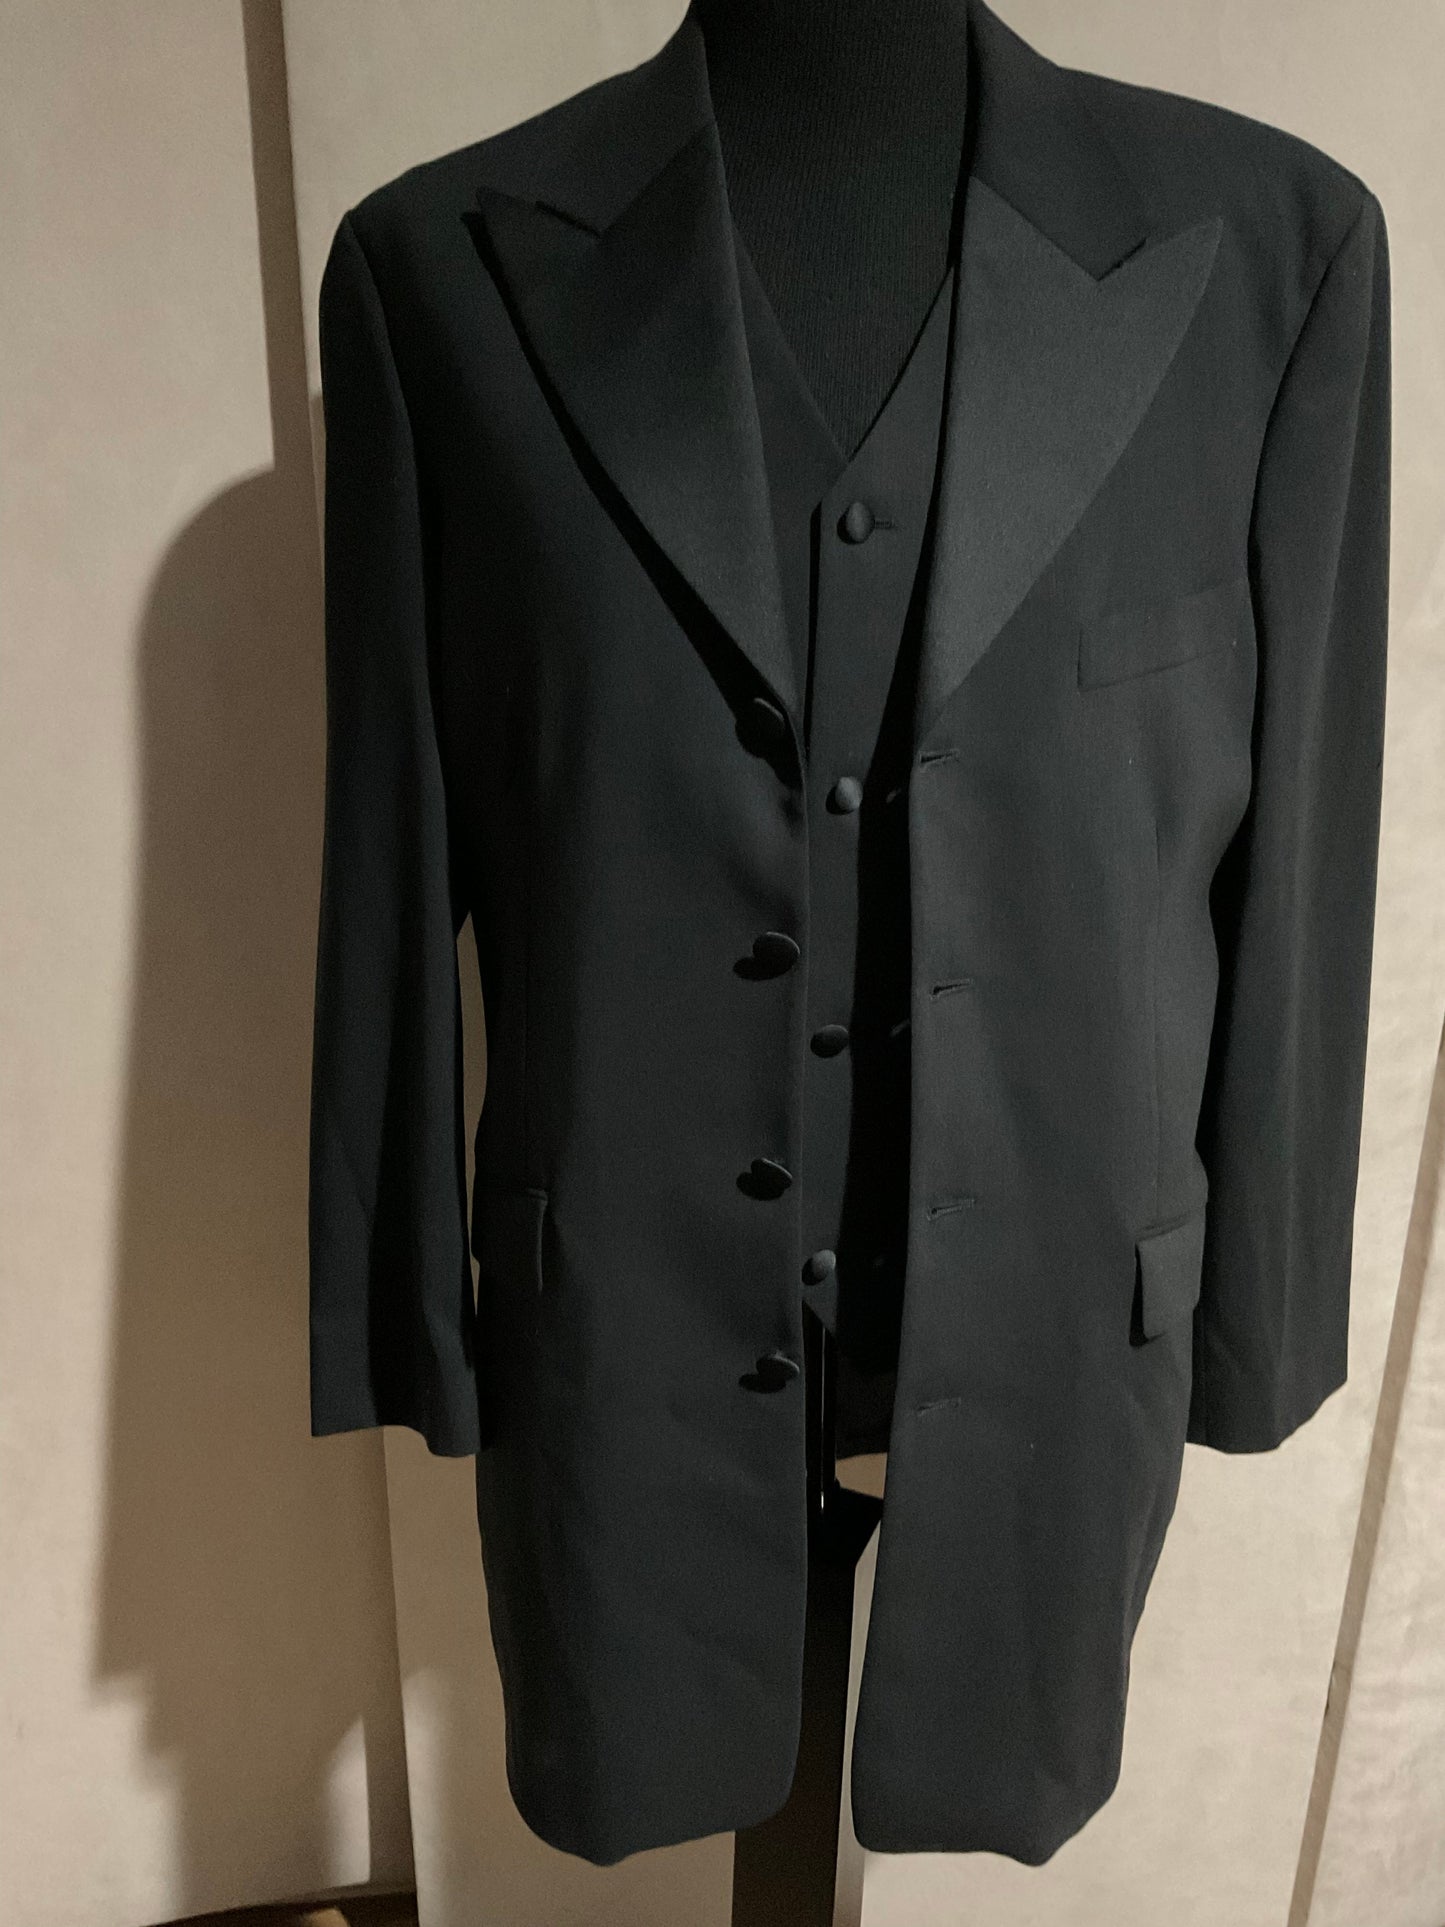 R P TUXEDO & VEST / 4 BUTTON BLACK / NEW / 42 REG OR LONG / MADE IN ITALY